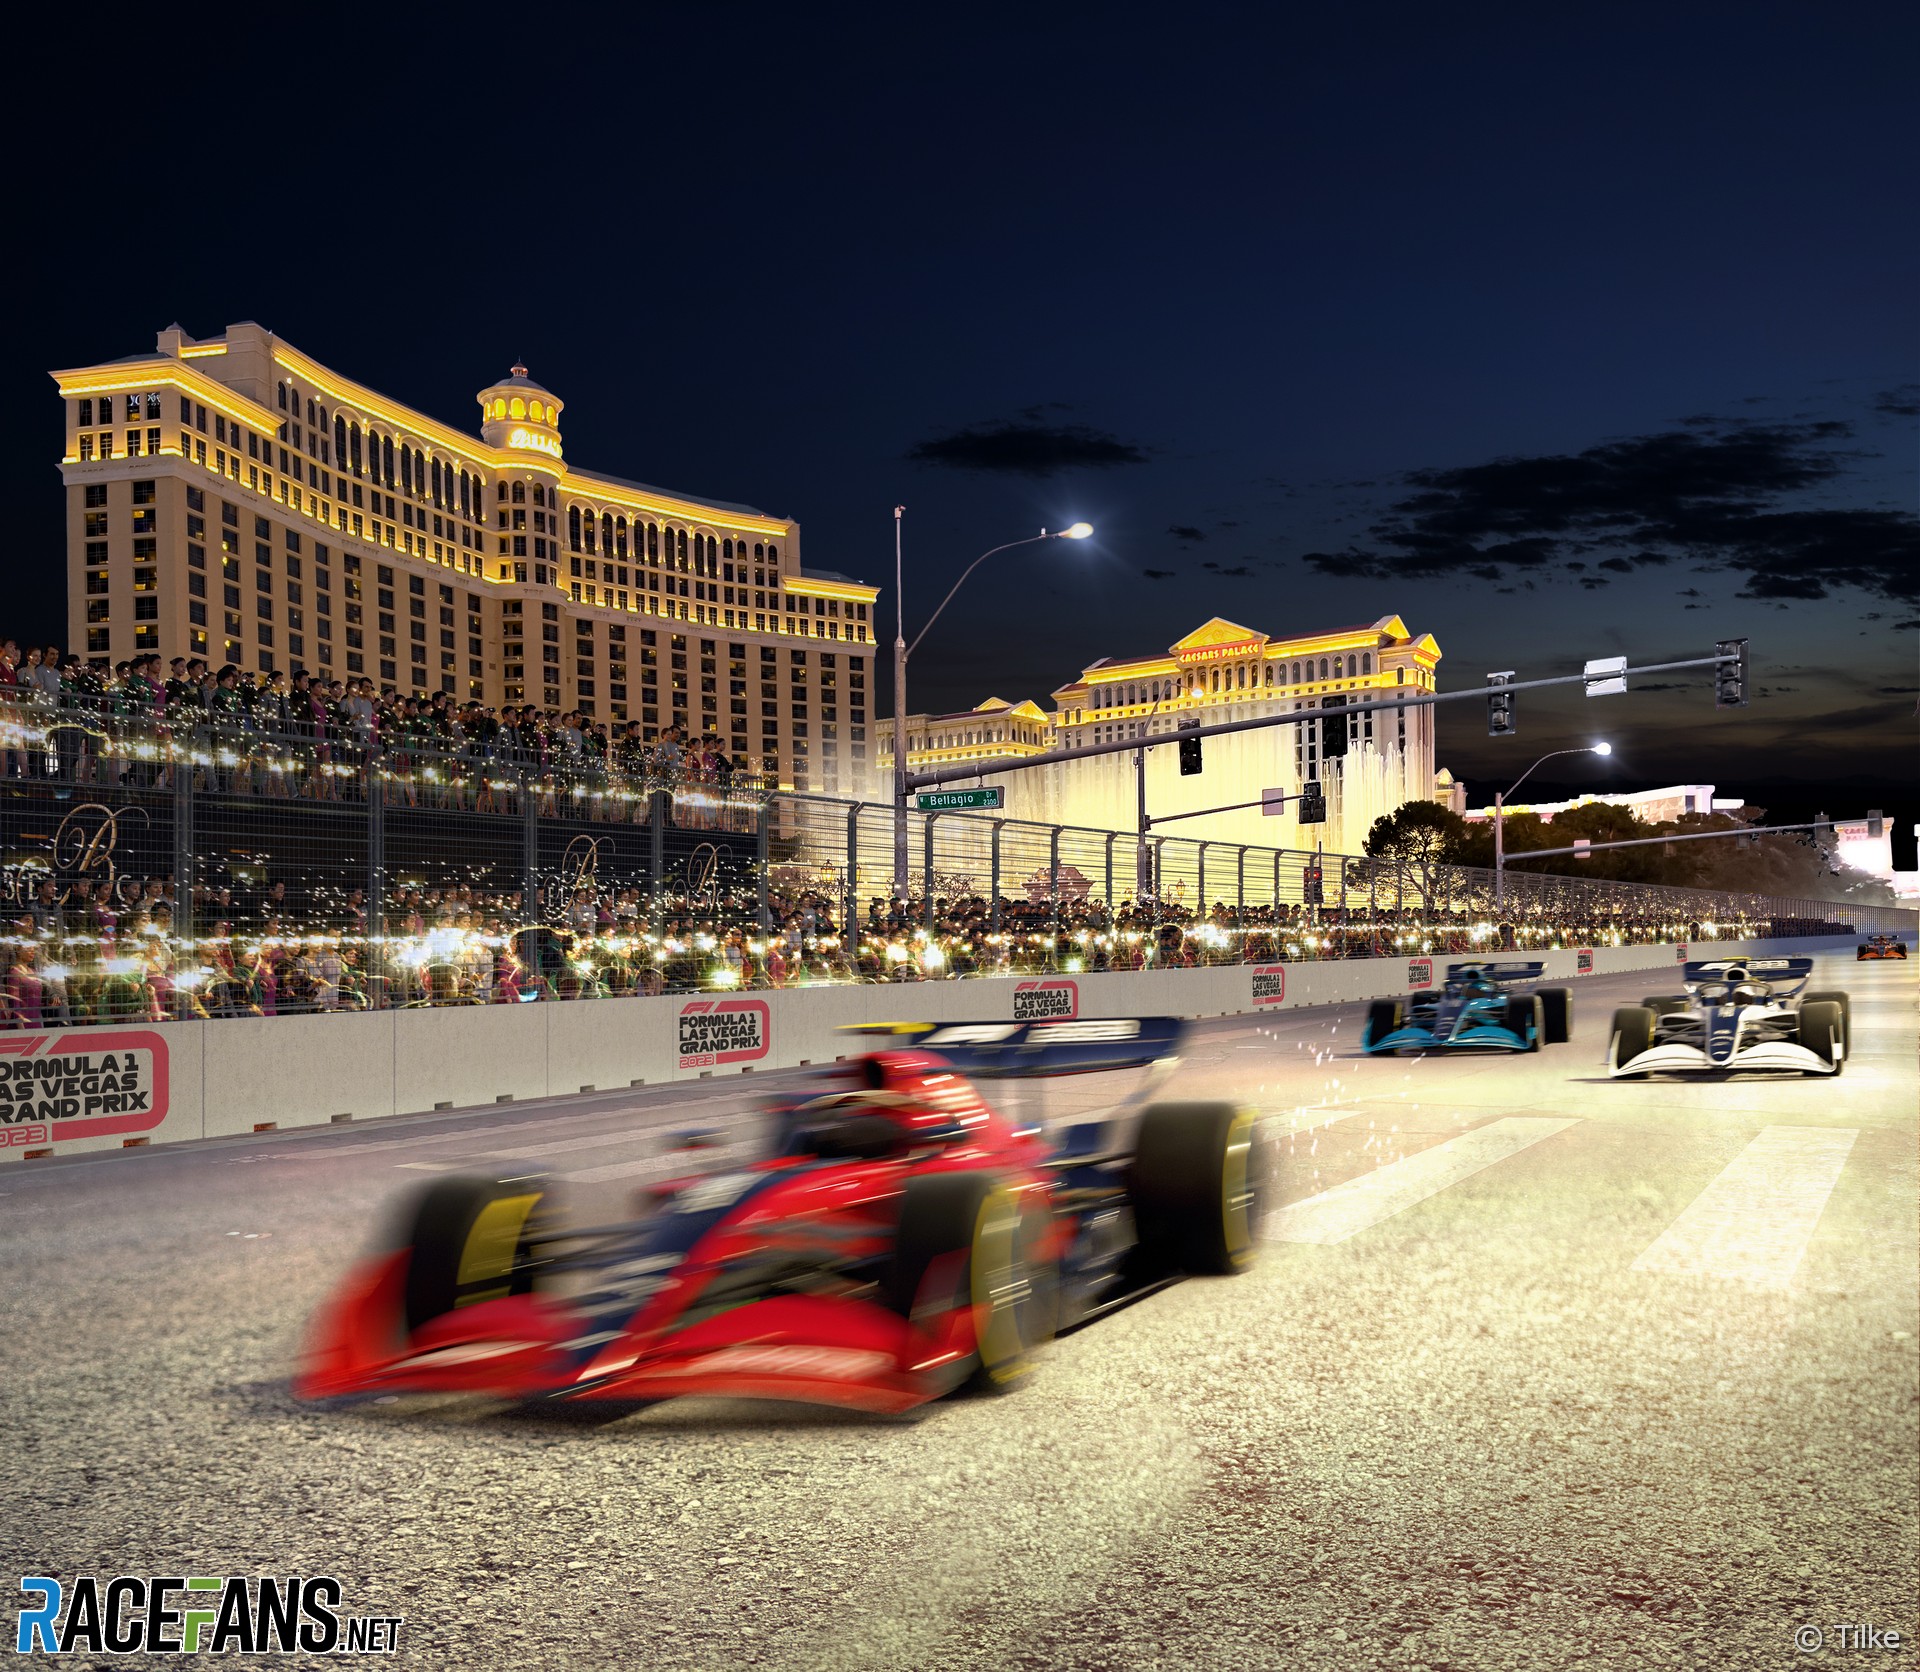 F1 planning year-round actions for Las Vegas race facility · RaceFans